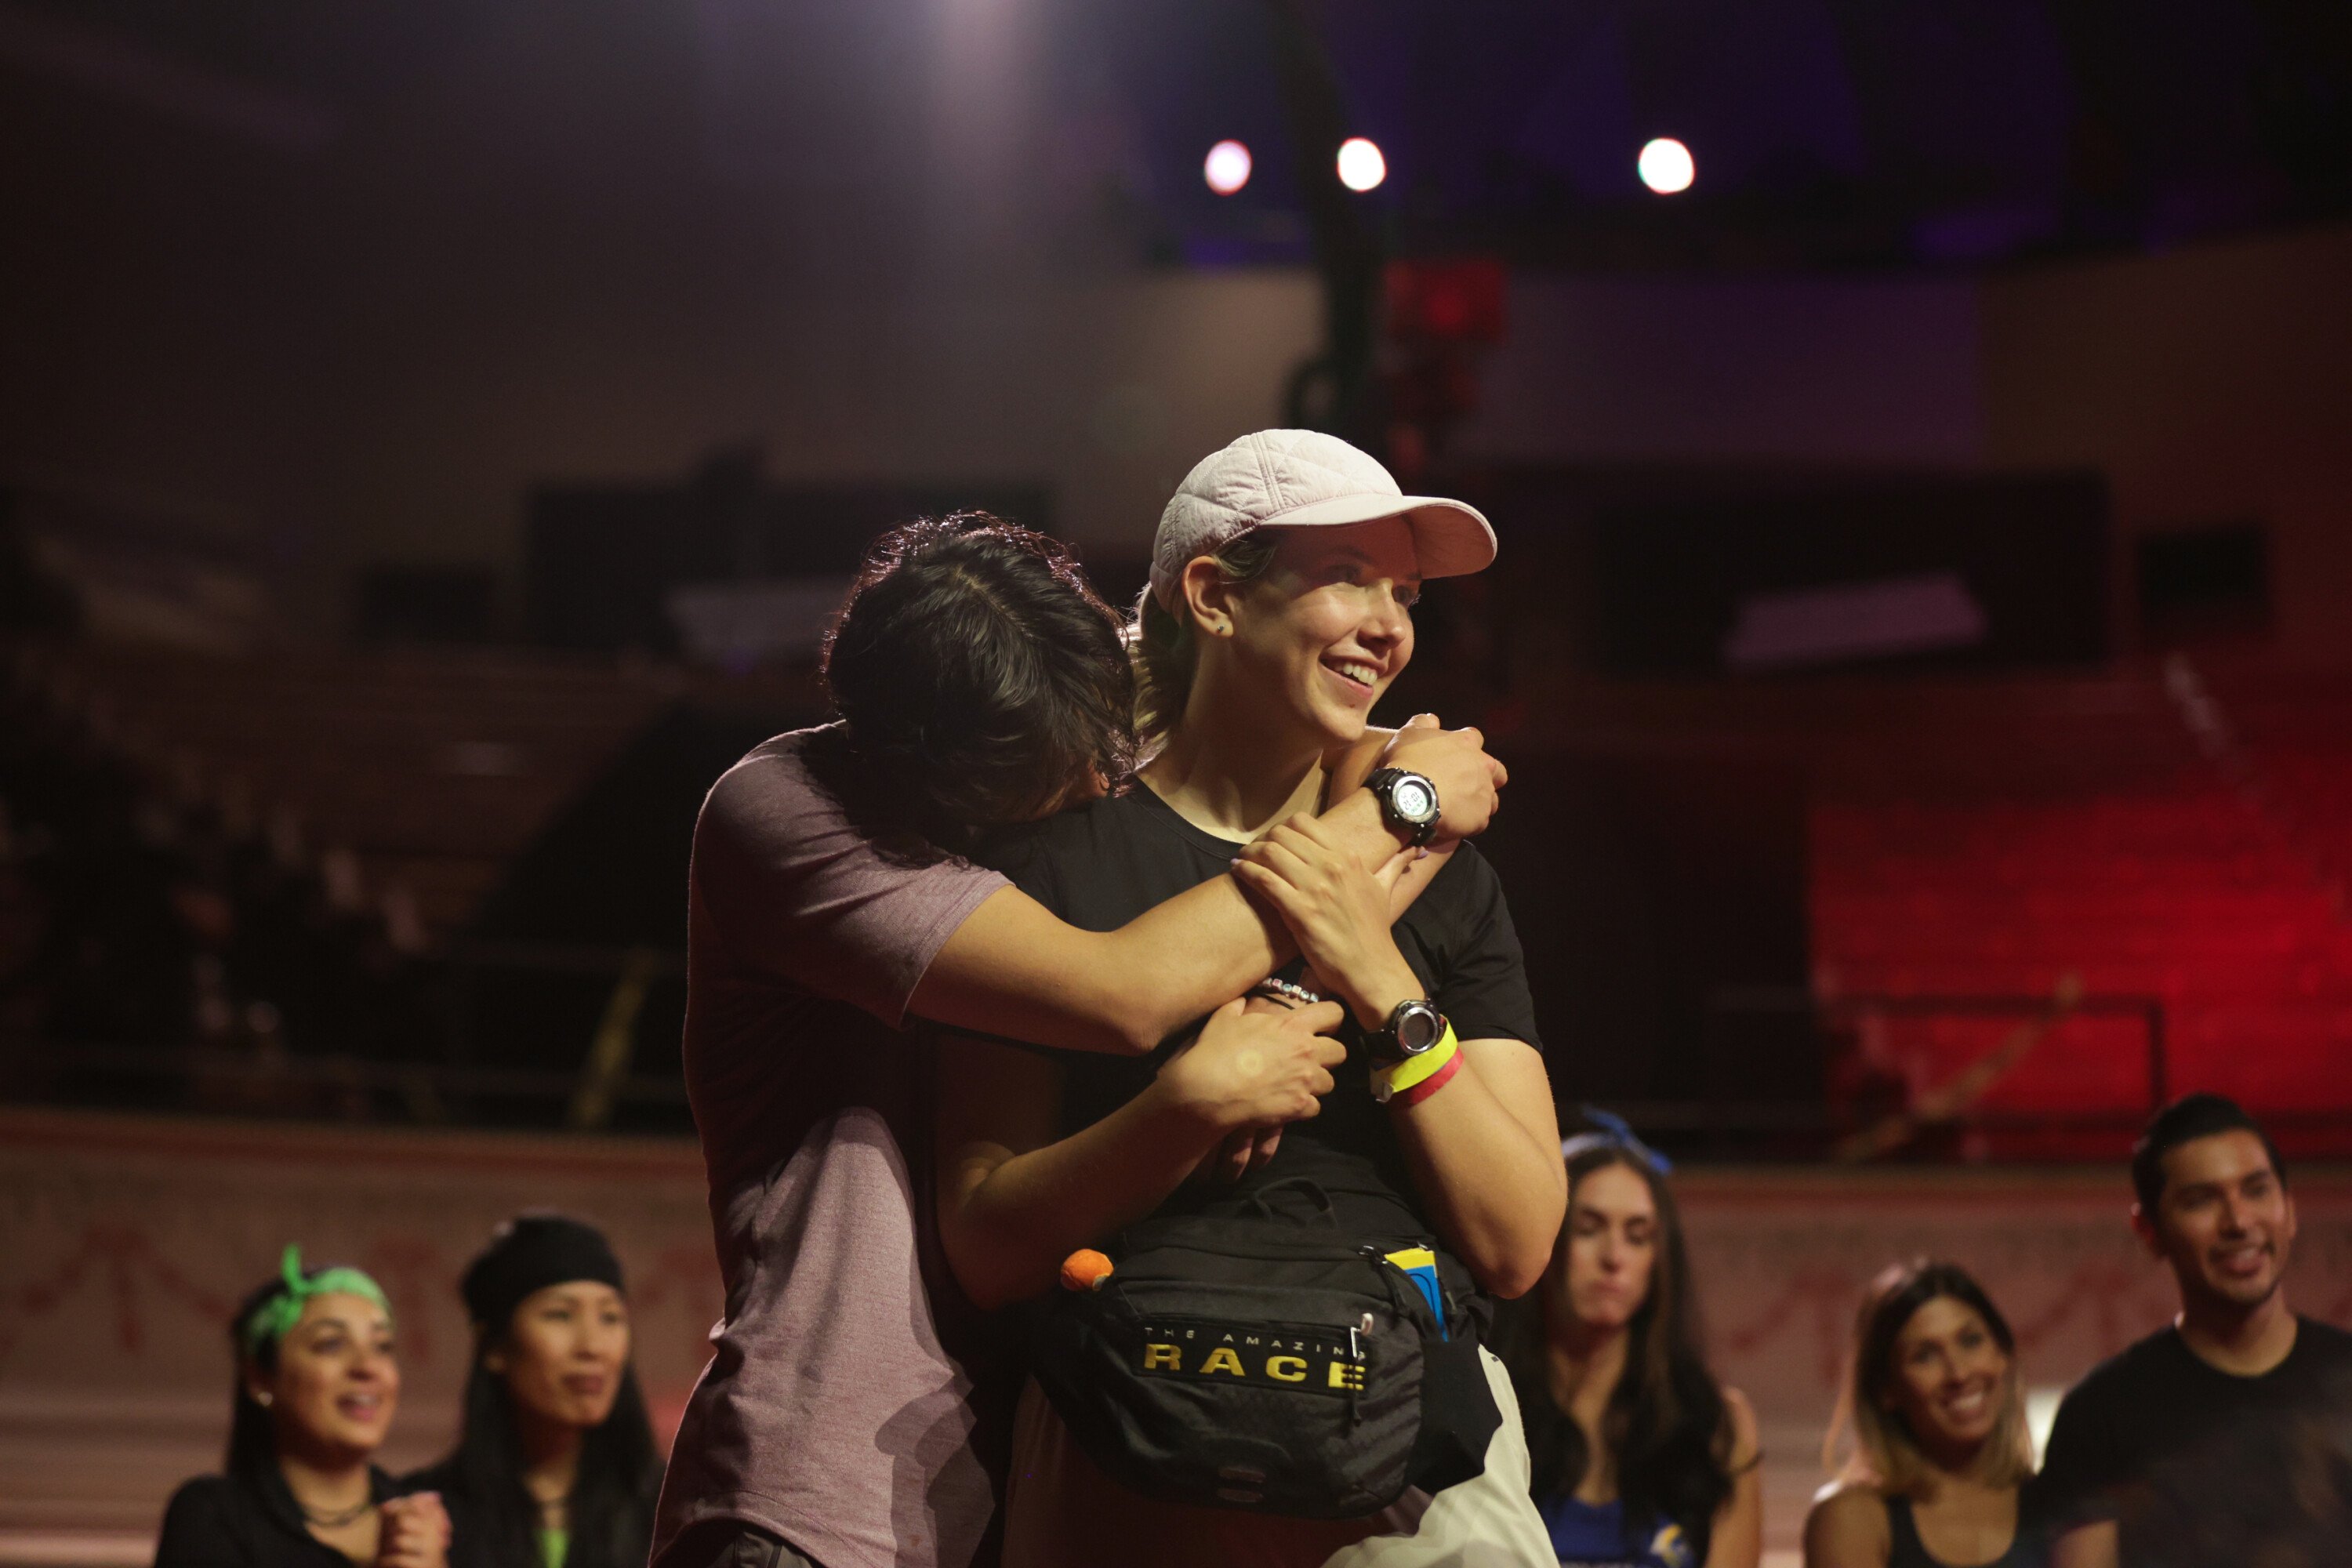 Derek Xiao and Claire Rehfuss, who starred in 'The Amazing Race' Season 34 on CBS, embrace at the finish line.